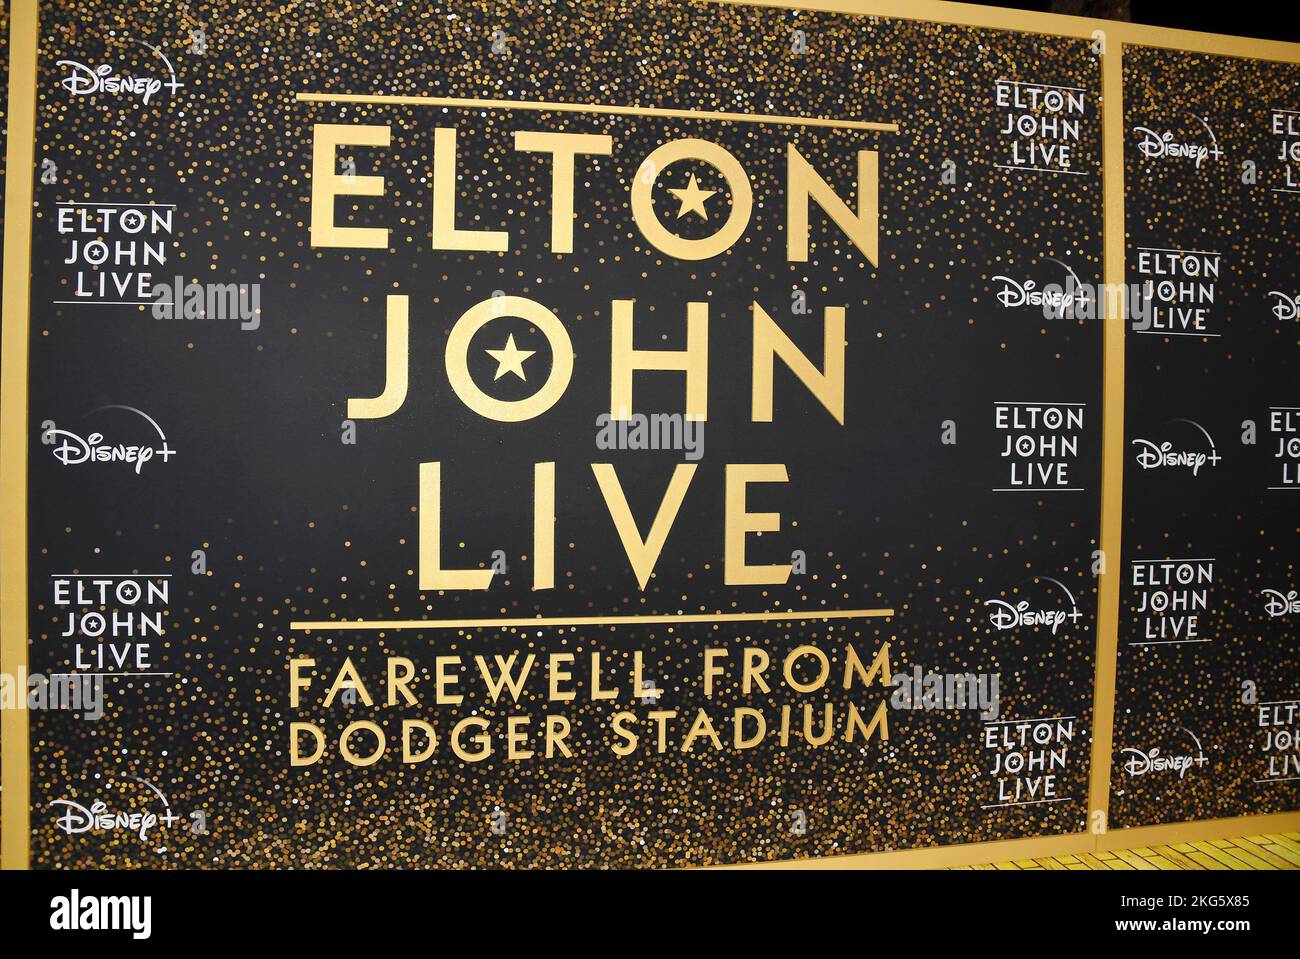 LOS ANGELES, CALIFORNIA - NOVEMBER 20: Background  attends the Disney+ "Elton John Live: Farewell From Dodger Stadium" Yellow Brick Road Event at Dodg Stock Photo